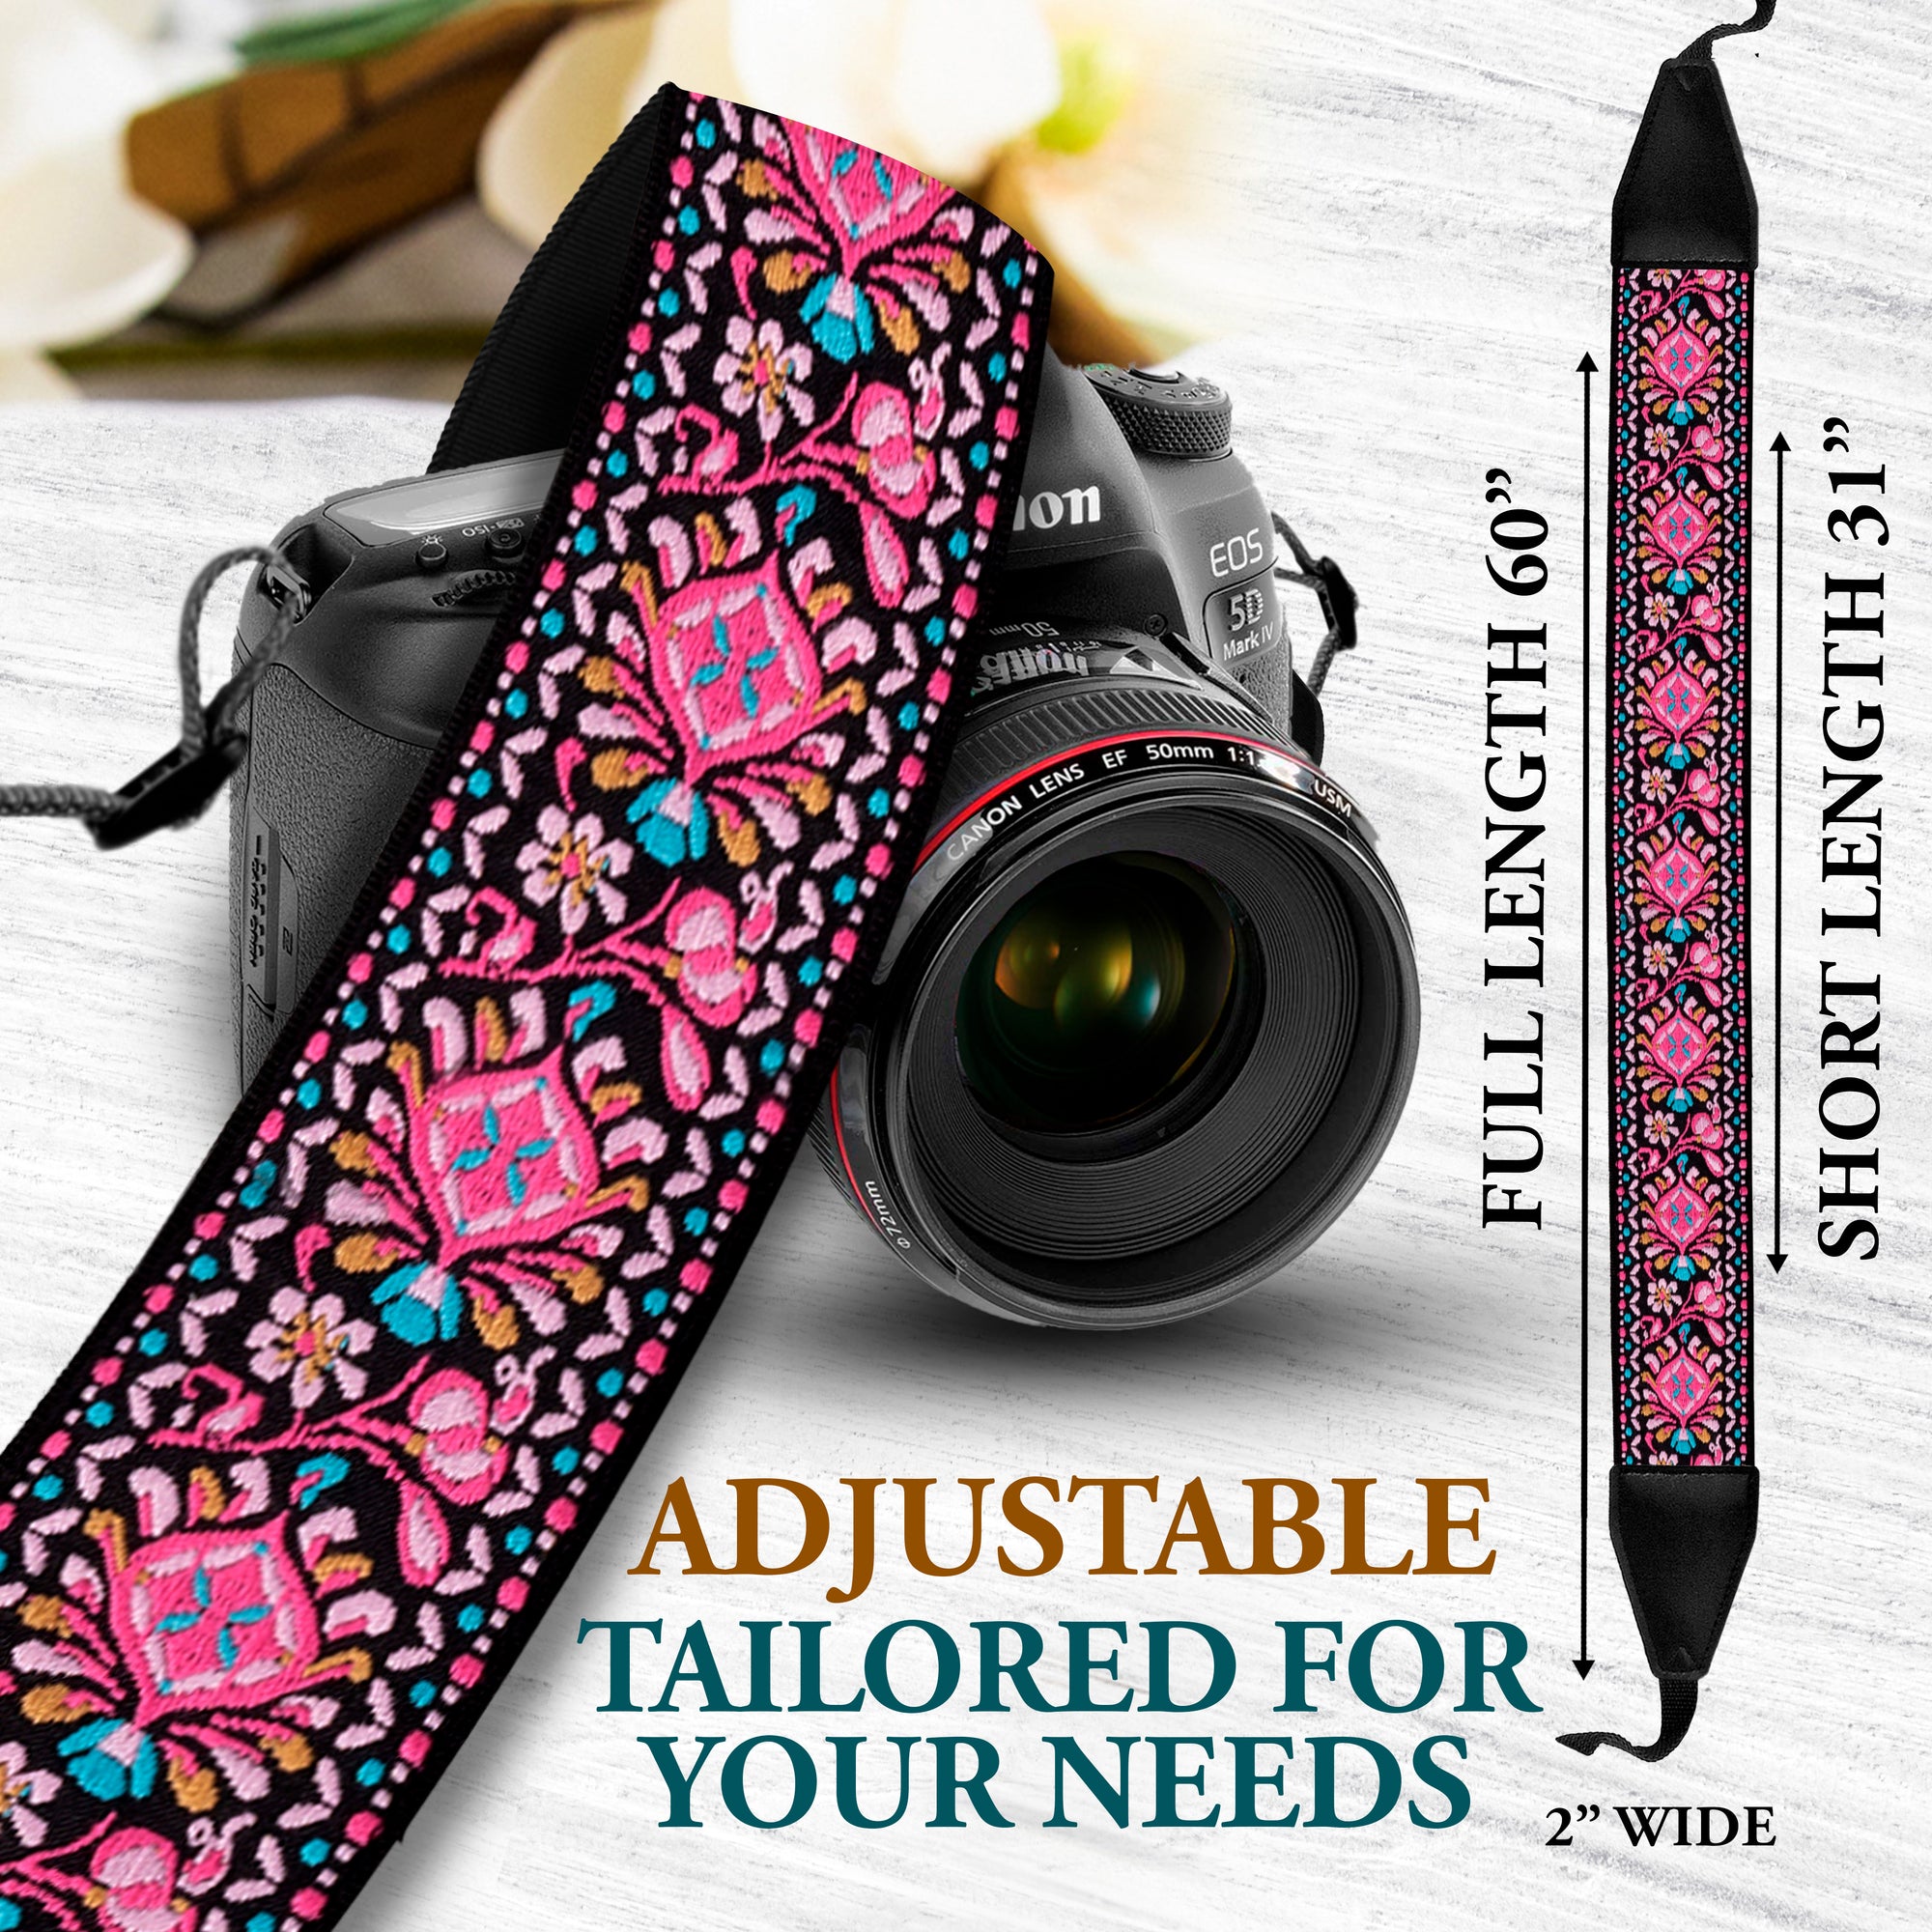 The HEIRLOOM Camera Strap - Adjustable Camera Strap For Canon, Nikon, Sony and all kinds of DSLR Camera